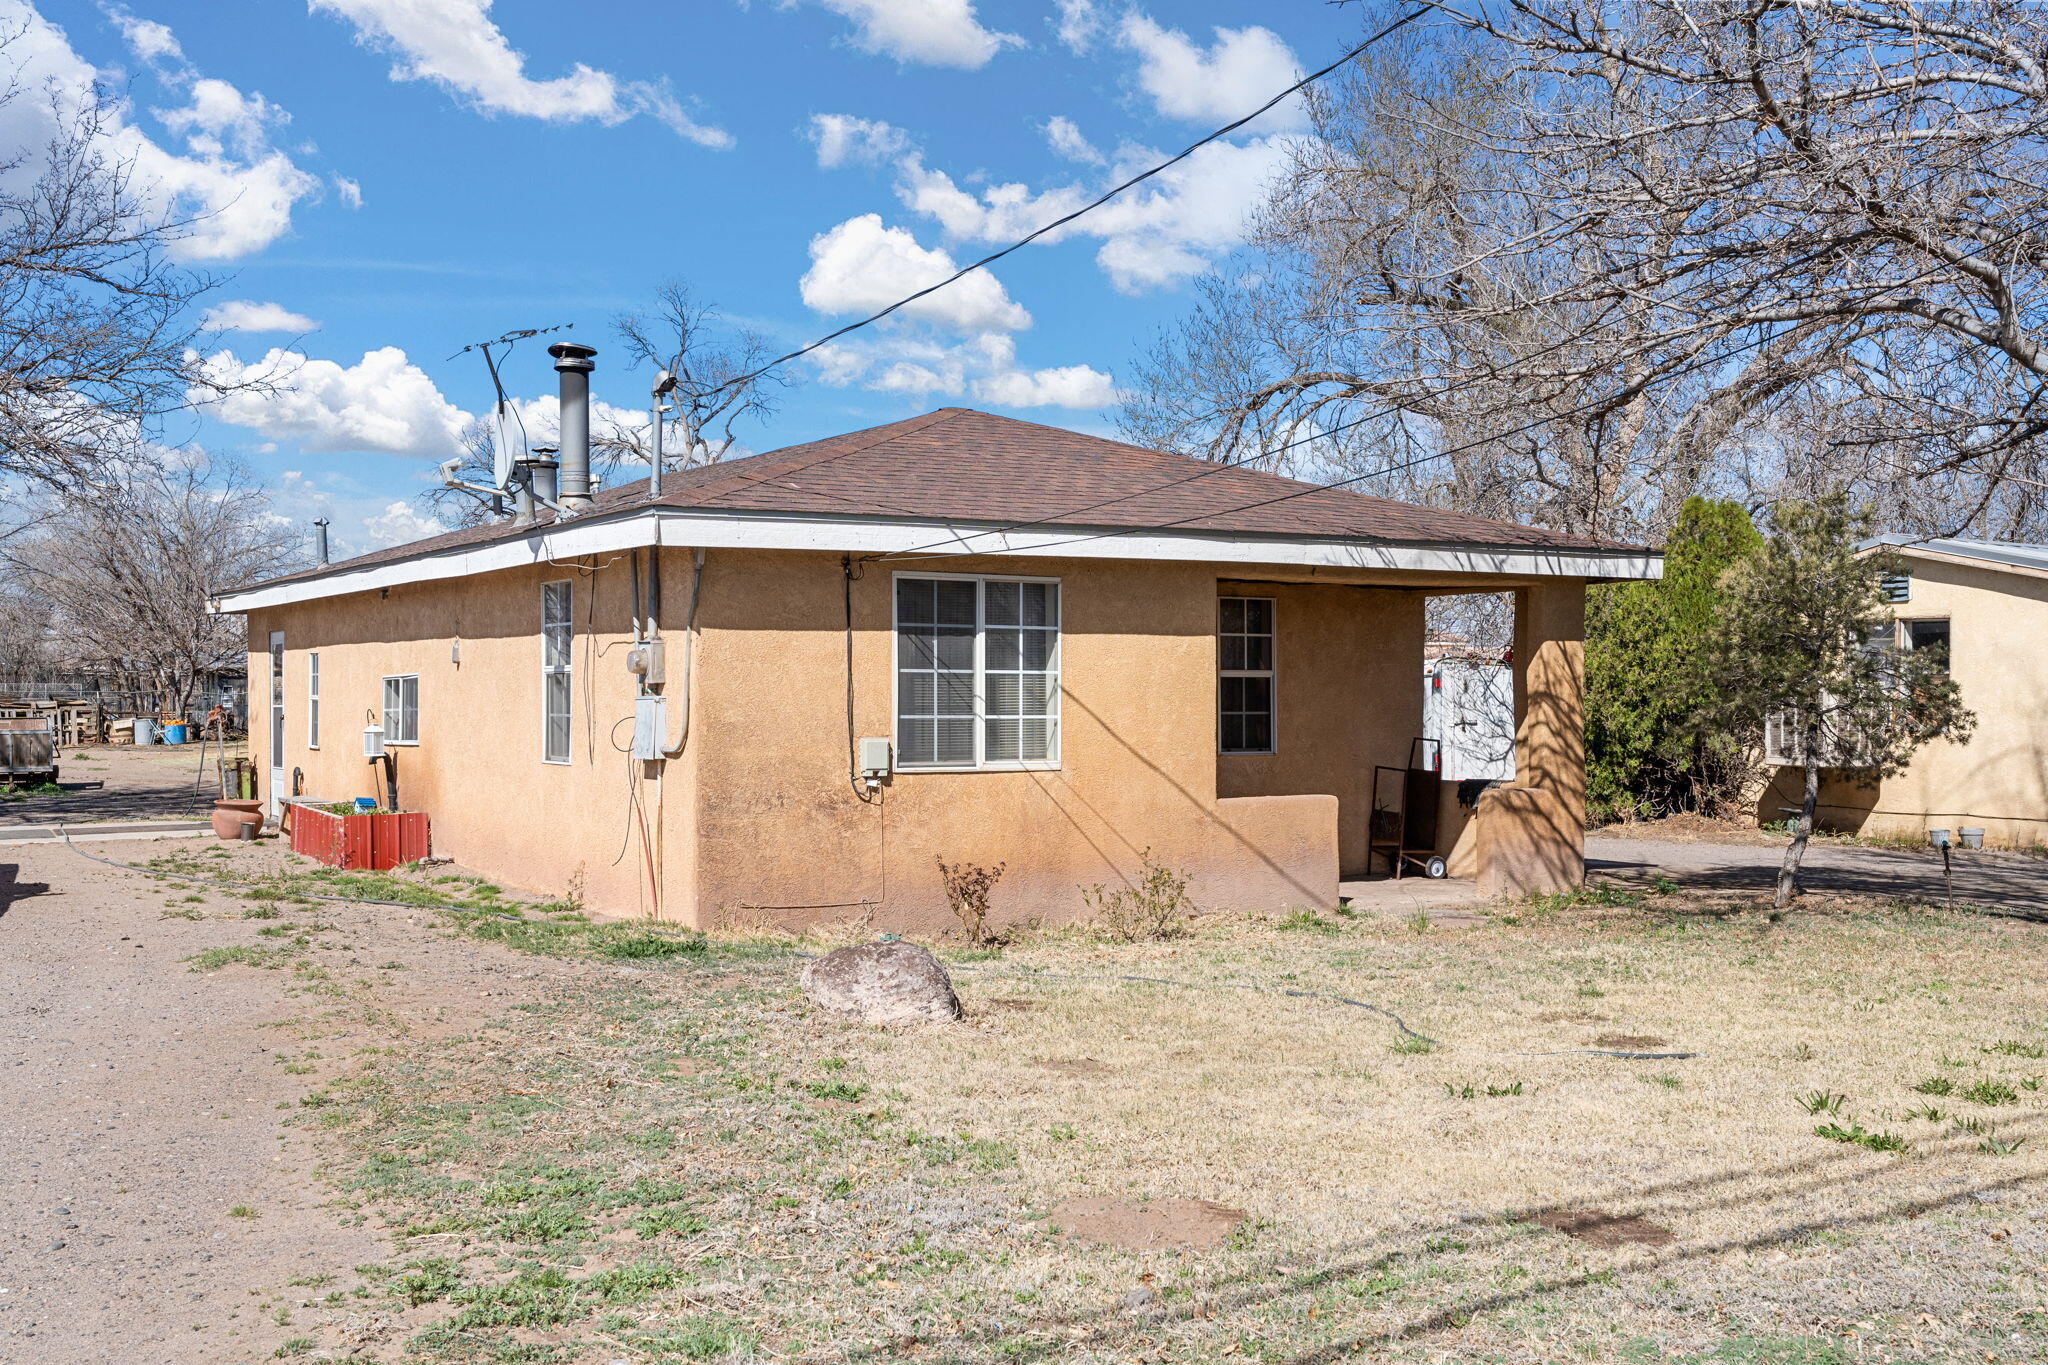 Three houses on 1 acre! live in one rent out two, main house is 3 bedrooms 1 bathroom(1075 sqf), second house is 1 bedroom 1 bathroom with kitchen and living area(703 sqf) Third is a studio apartment(493 sqf)! Room for animals, horse, pigs and chickens.